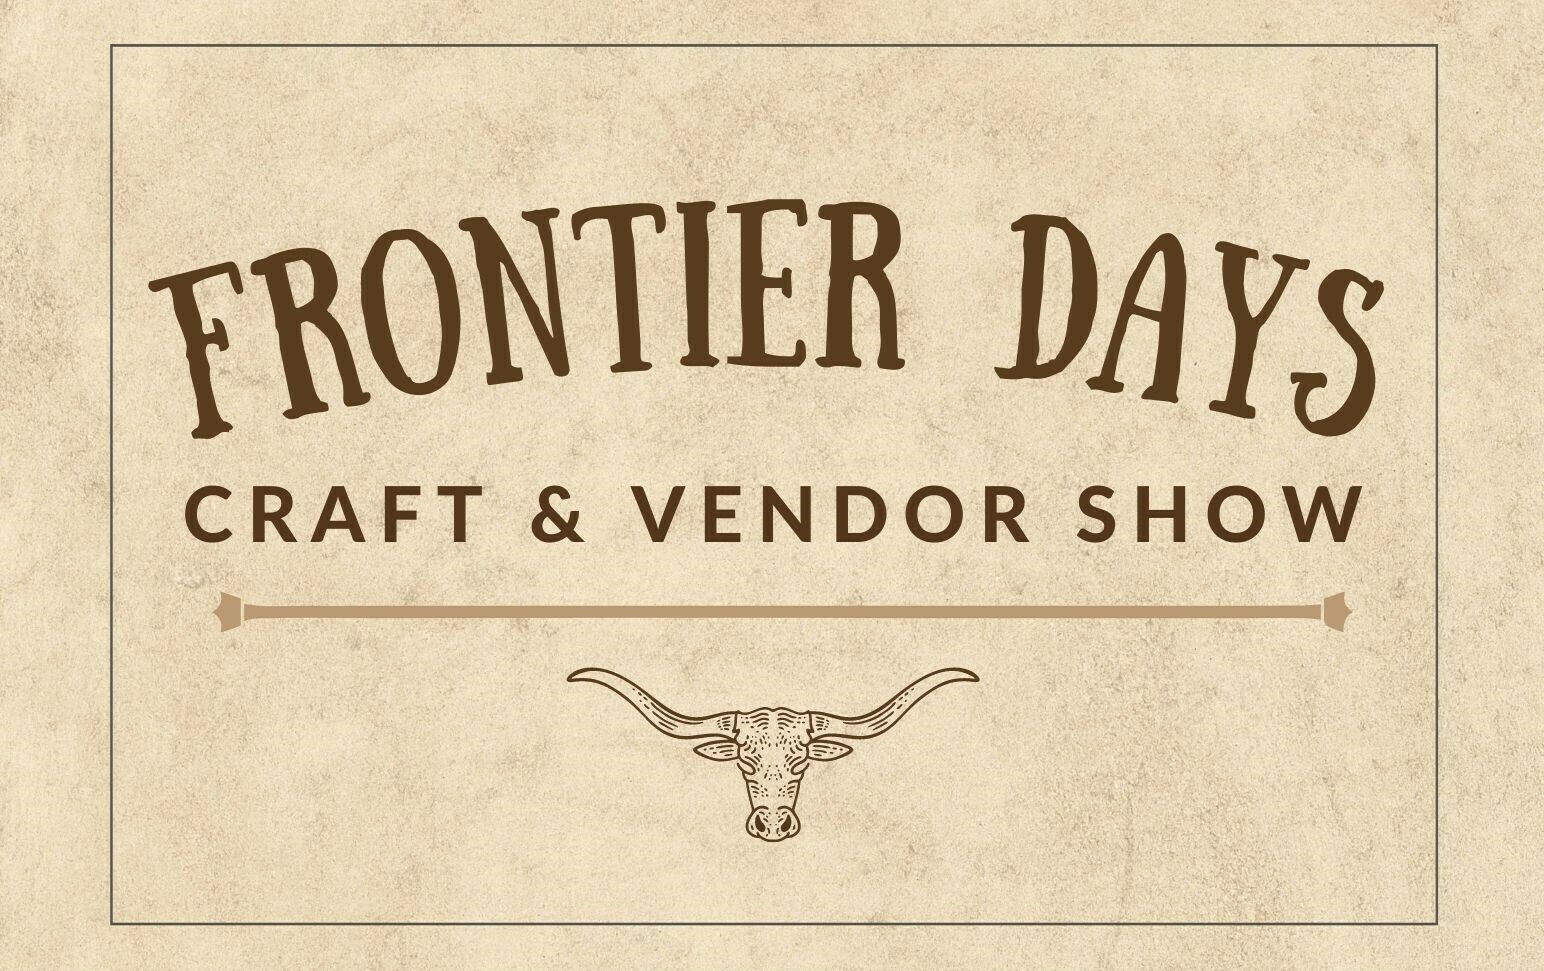 Frontier Days Craft and Vendor Show, Cheyenne, Wyoming, United States